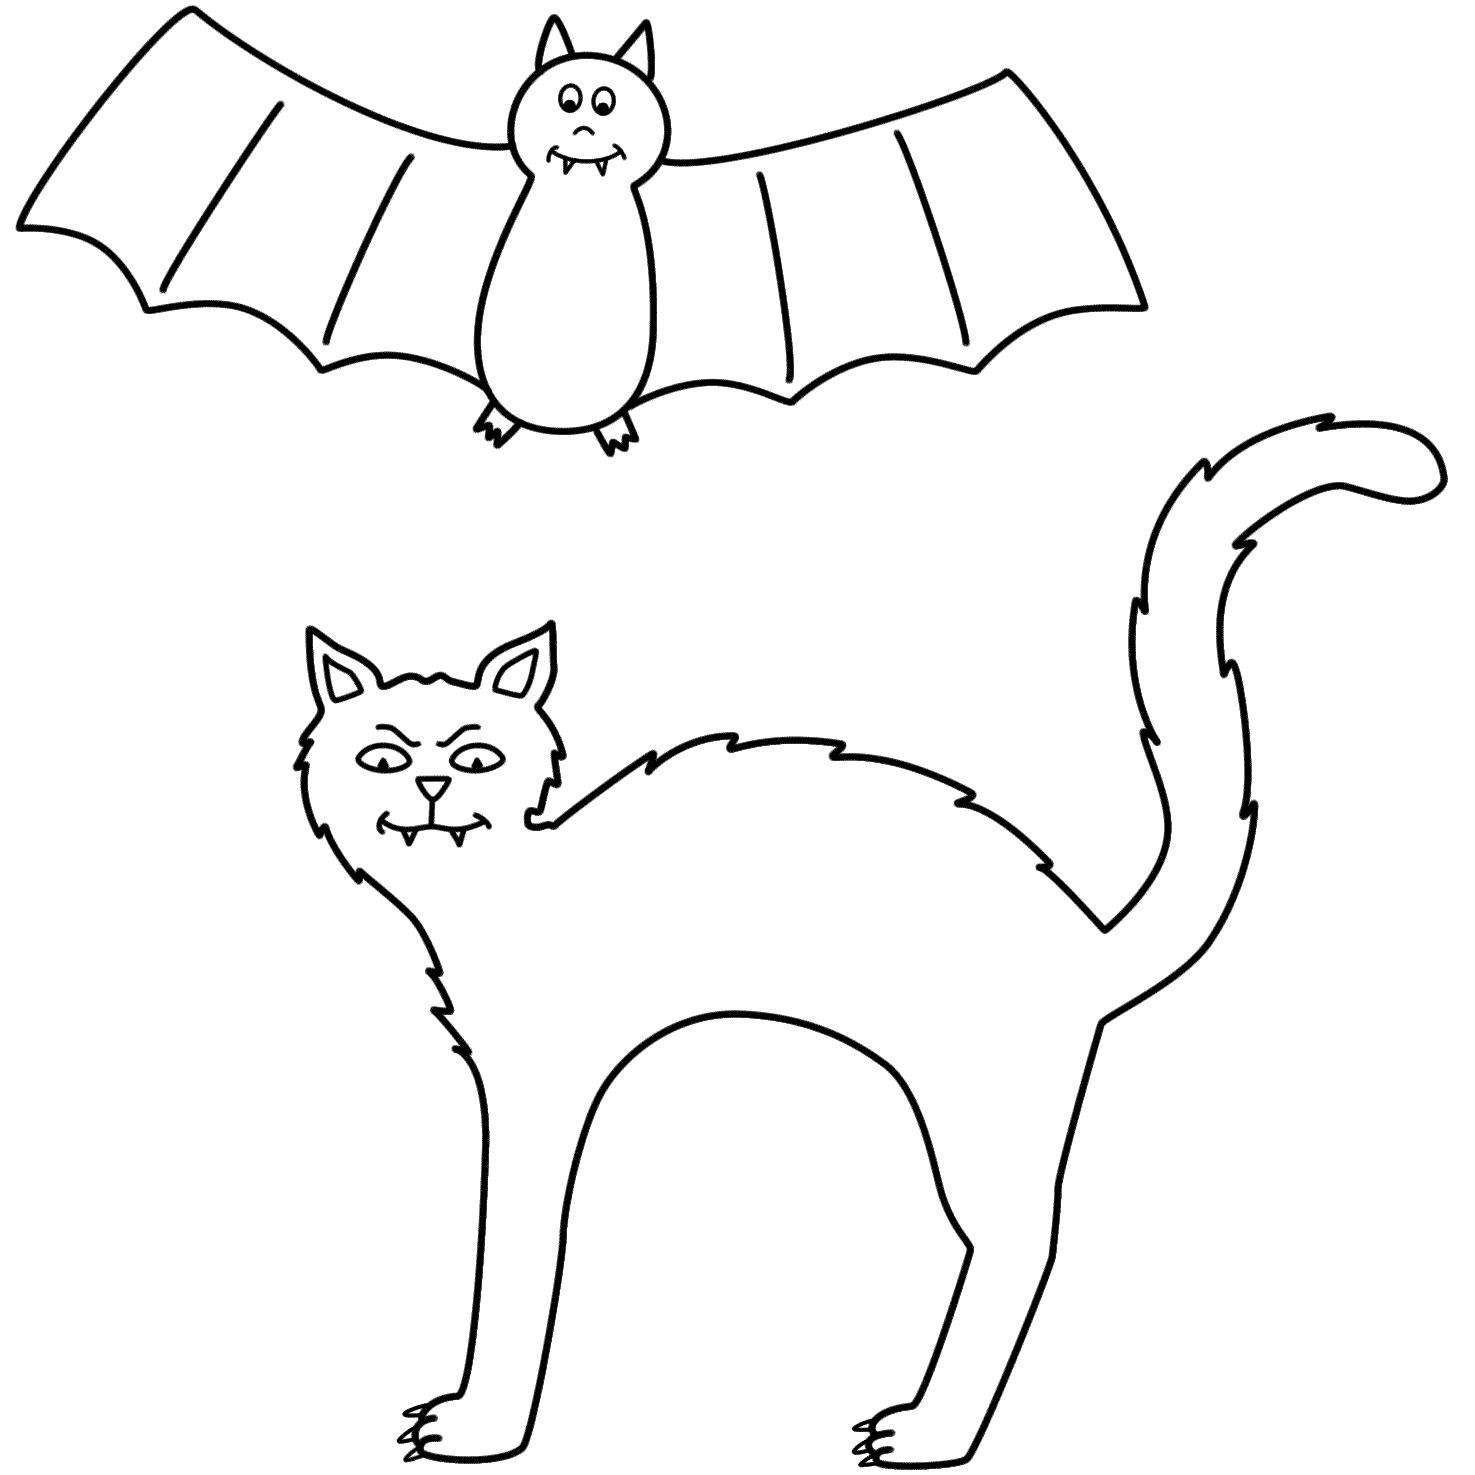 Halloween Black Cat Image Coloring Page